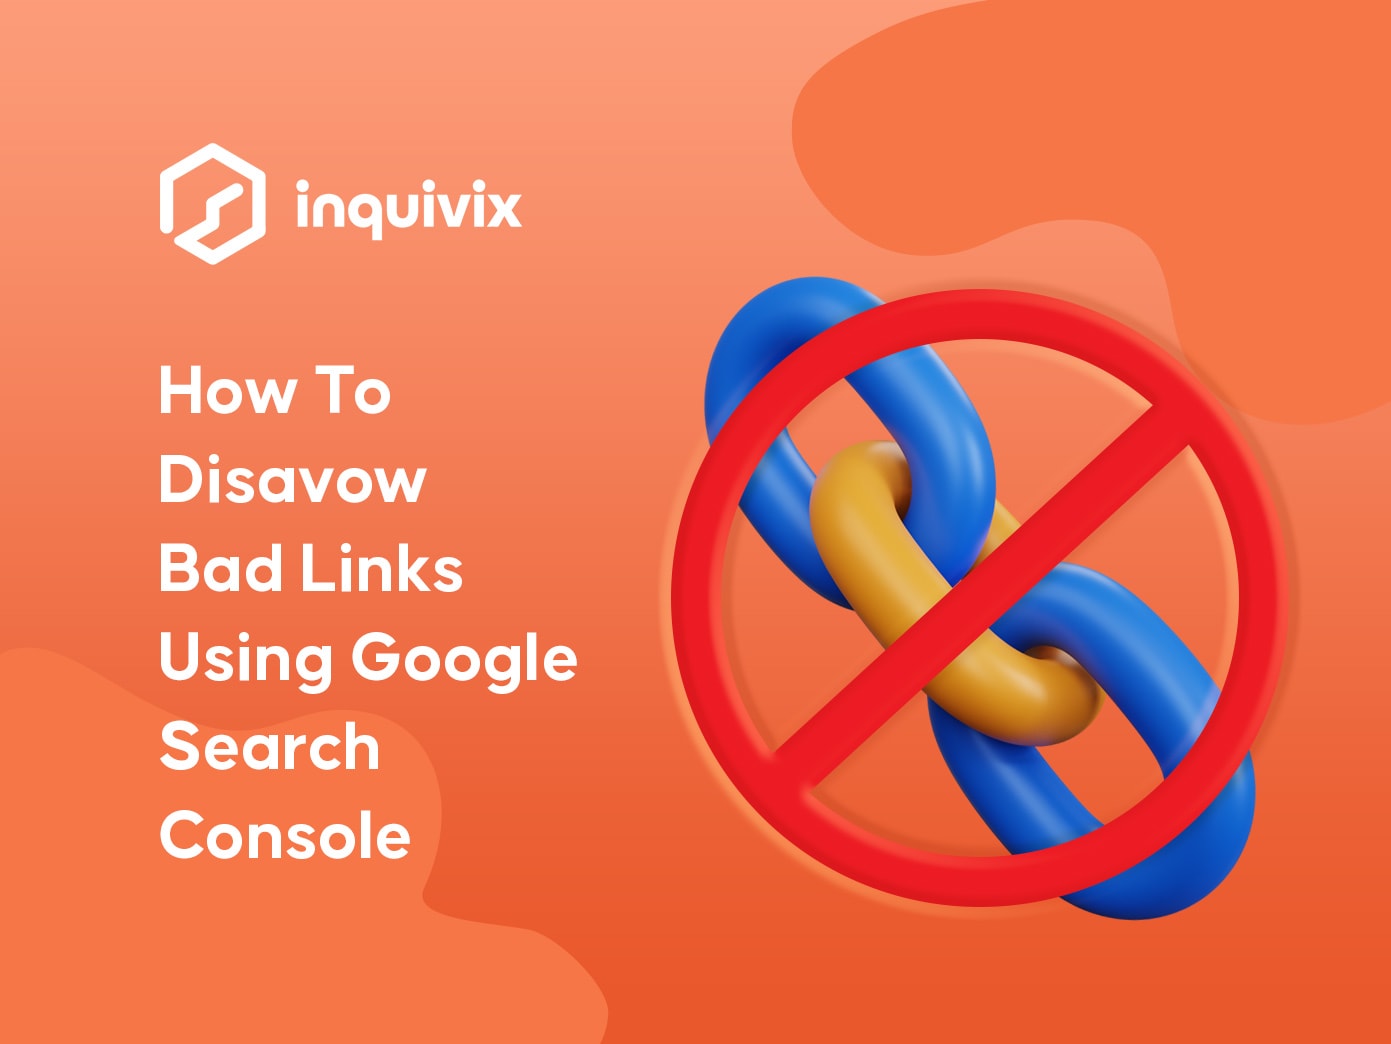 How To Disavow Bad Links Using Google Search Console | INQUIVIX